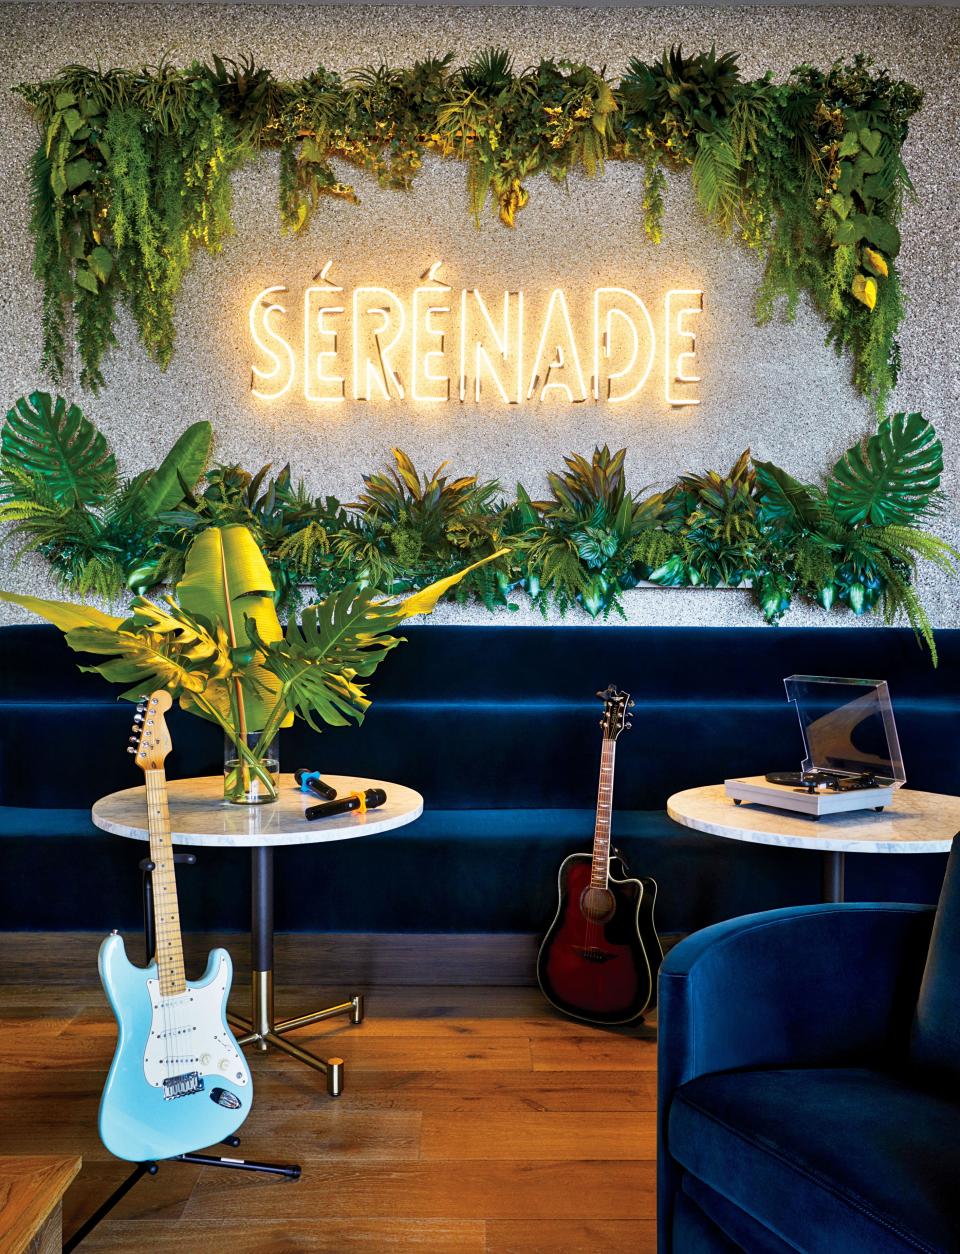 The Sérénade Karaoke room features a bespoke neon sign designed by V Starr. Wall covering by Phillip Jeffries; custom Banquette and Fama chairs in a Brentano velvet.